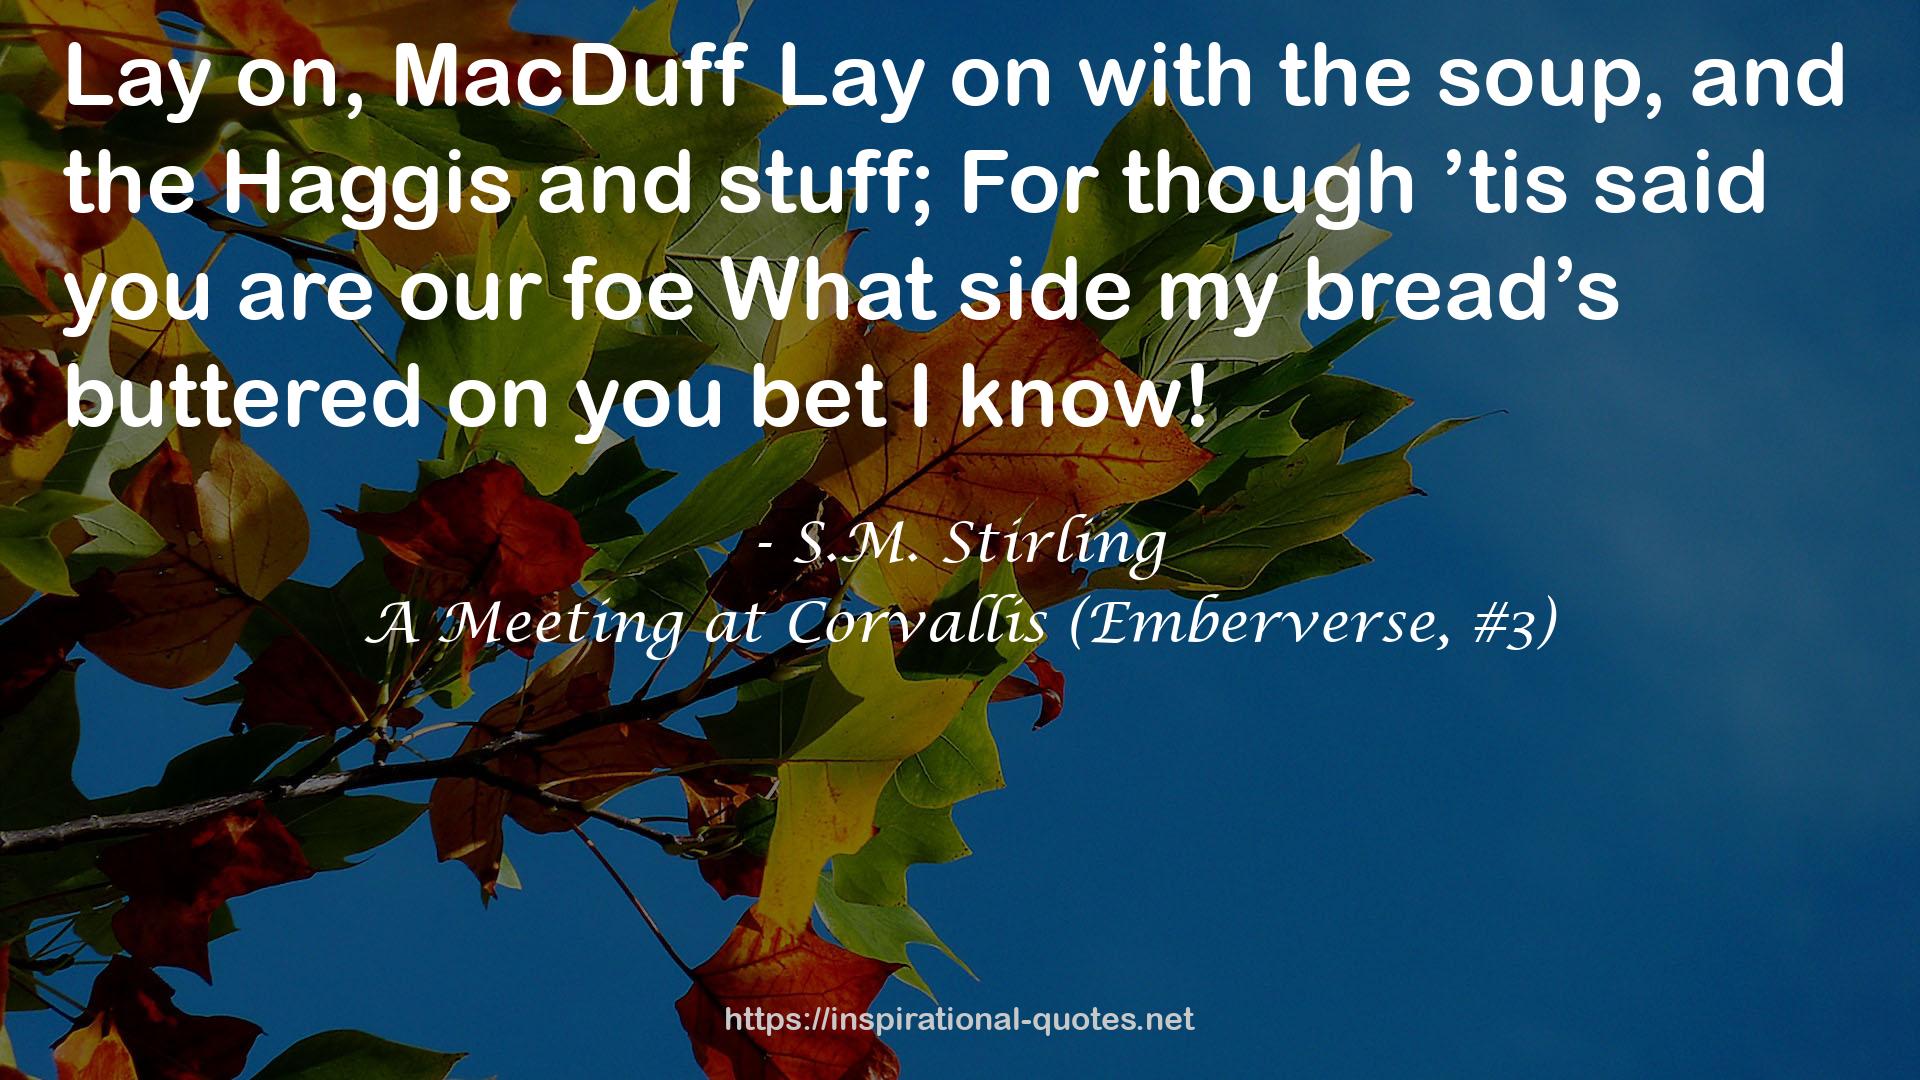 S.M. Stirling QUOTES